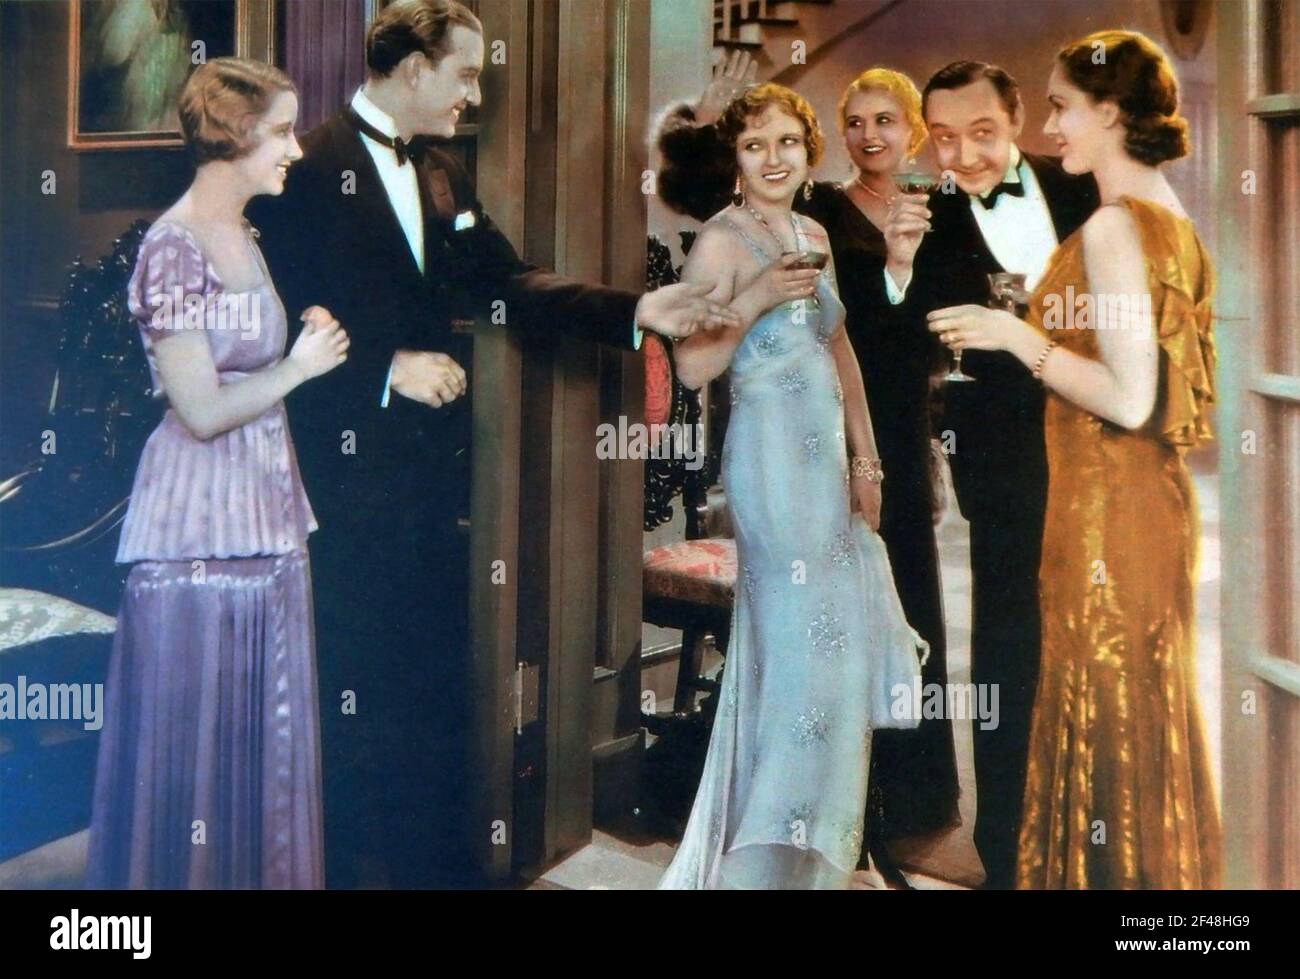 A LADY KAPITULIERT 1930 Universal Pictures Film Stockfoto